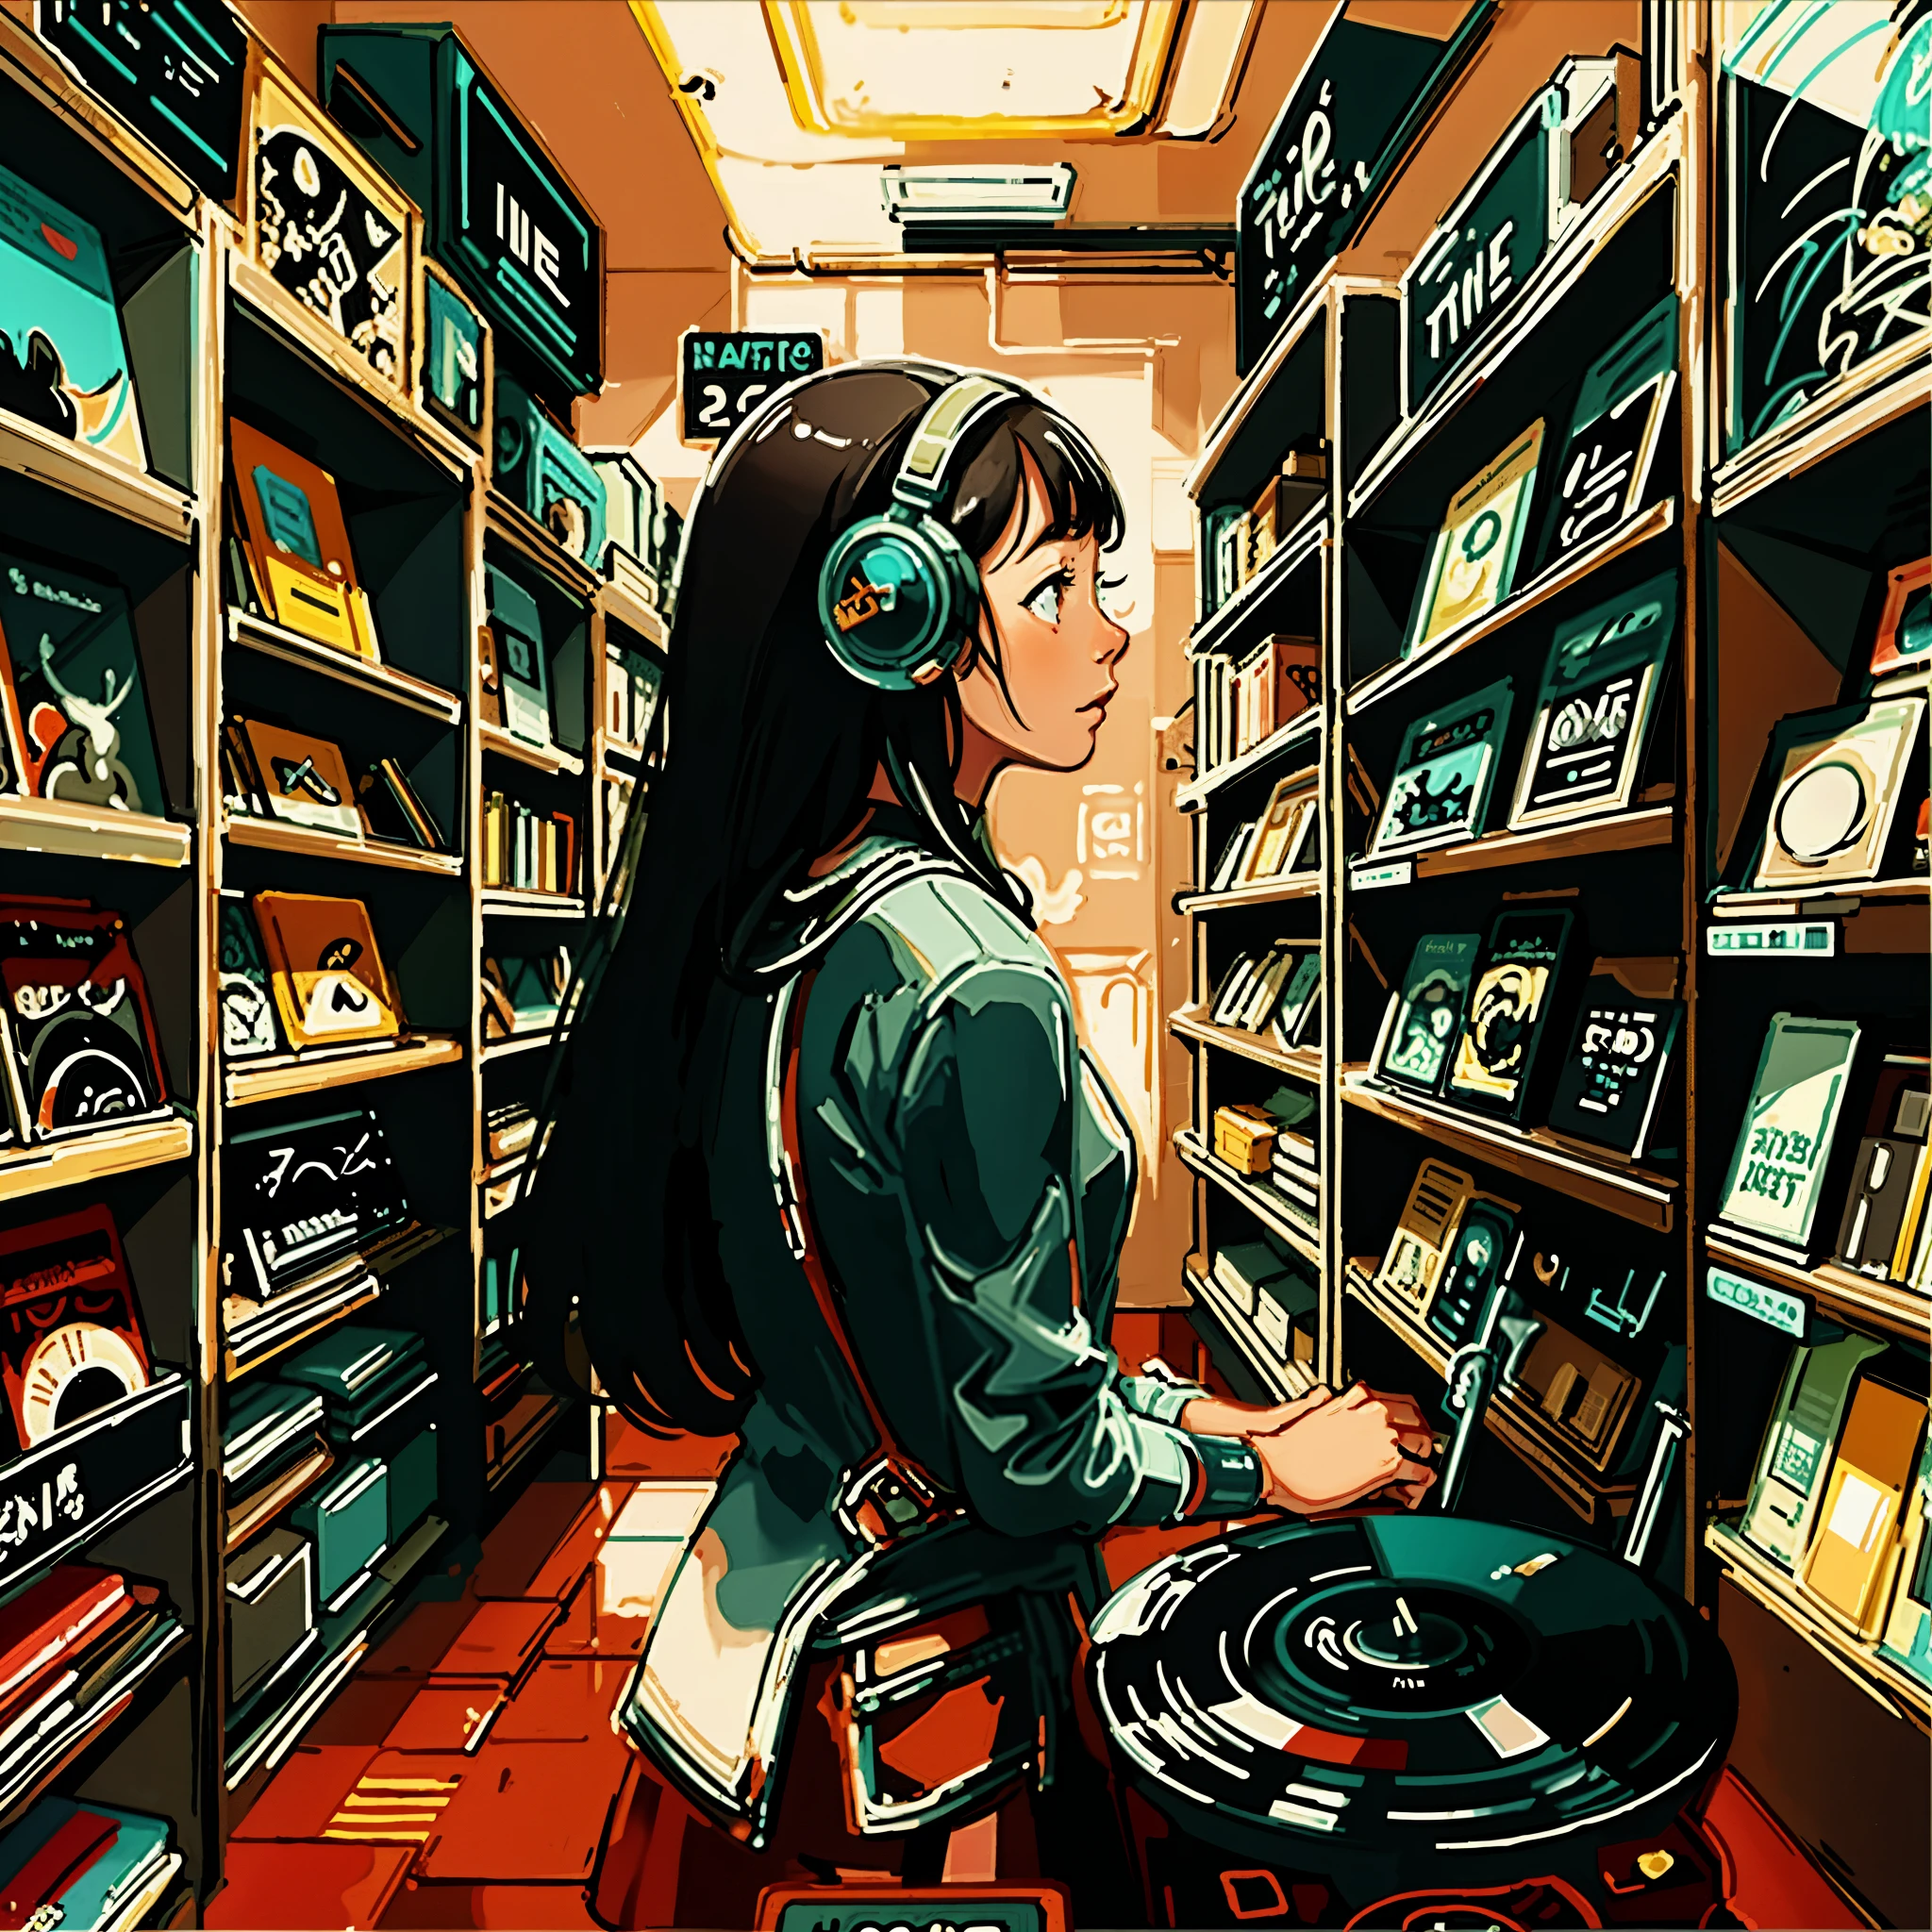 (long shot), wide shot, (Film noise), Old cartoons, (lots of records:1.3), vinyl record shop, (masterpiece, highest quality, highest quality, official art, beautiful and aesthetic: 1.2), (Woman listening to music with one headphone), very detailed, (fractal art: 1.4), best details, guitar, (notebook: 1.4), ( Lo-Fi Hip Hop), Side view, Old anime texture, alone, loudspeaker, cyber punk, vinyl